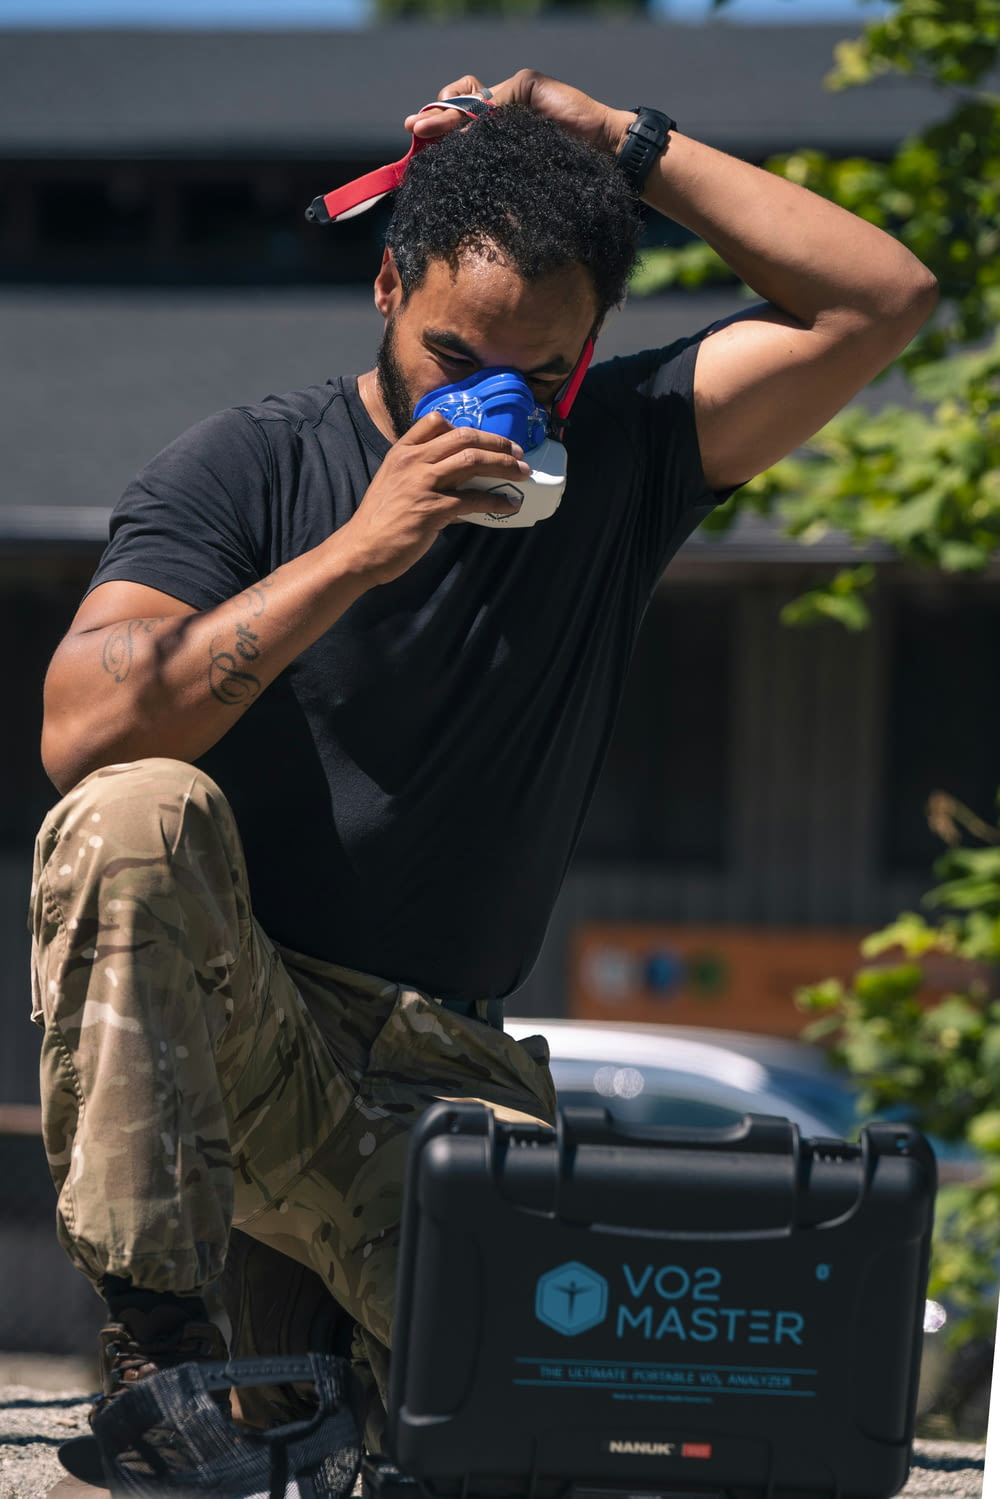 a man sitting on the ground drinking from a cup